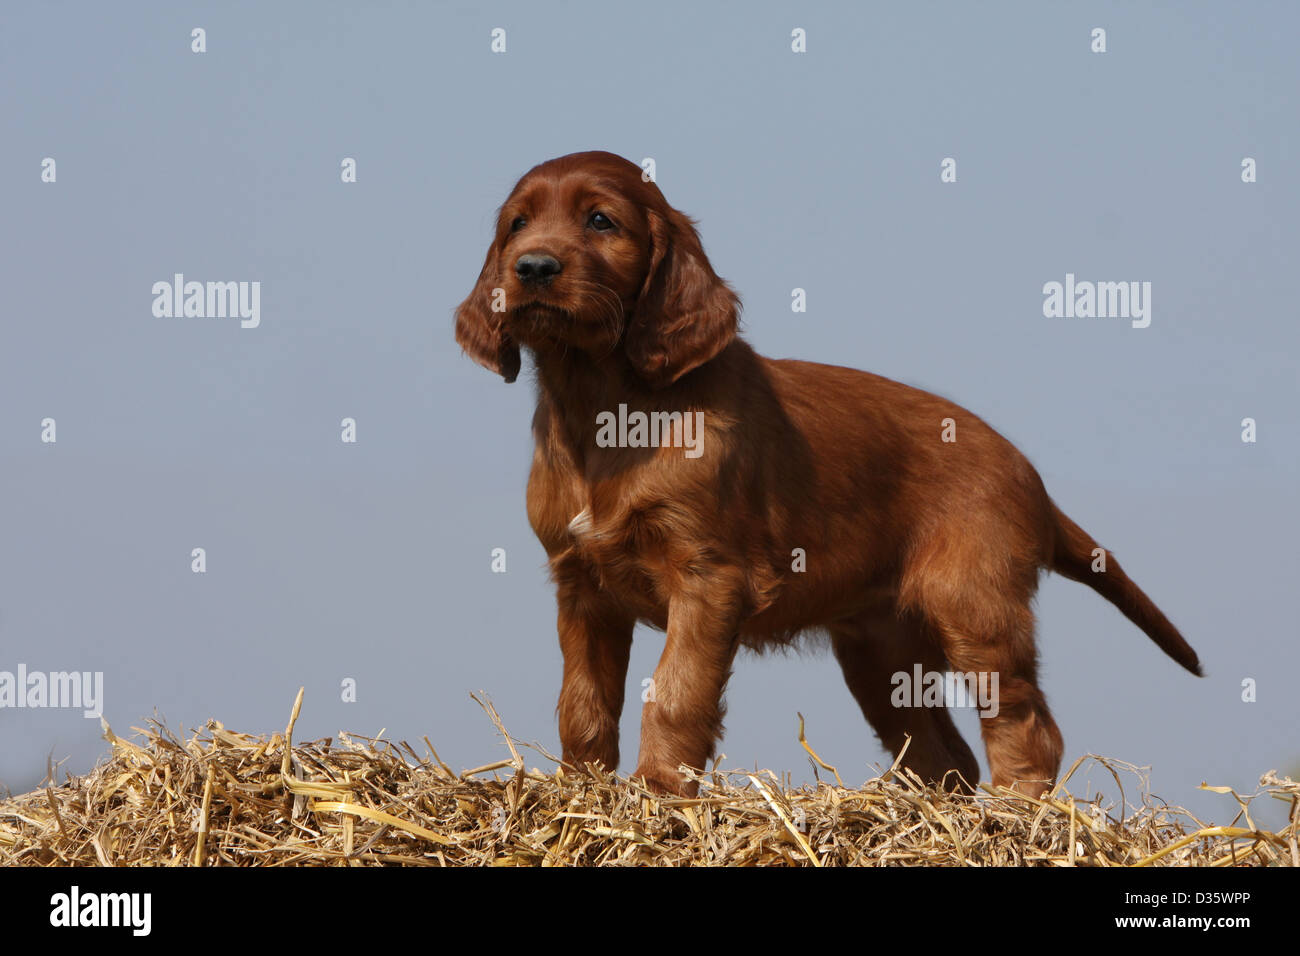 Dog Irish Setter / Red Setter puppy standing on the straw Stock Photo